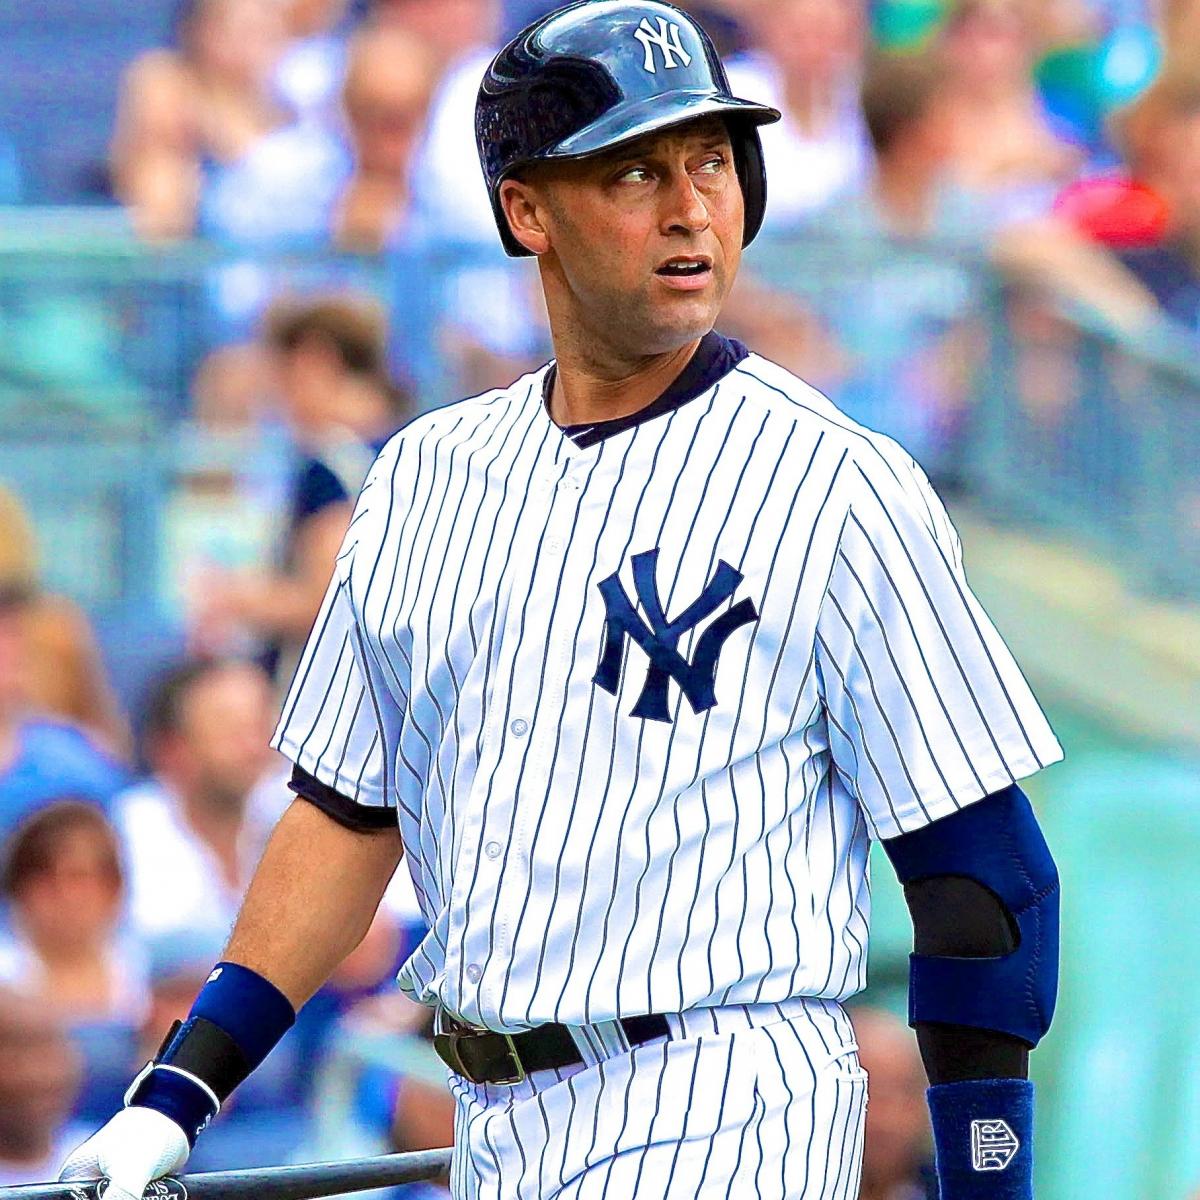 Why Manny Ramirez says Derek Jeter would have been 'just a regular